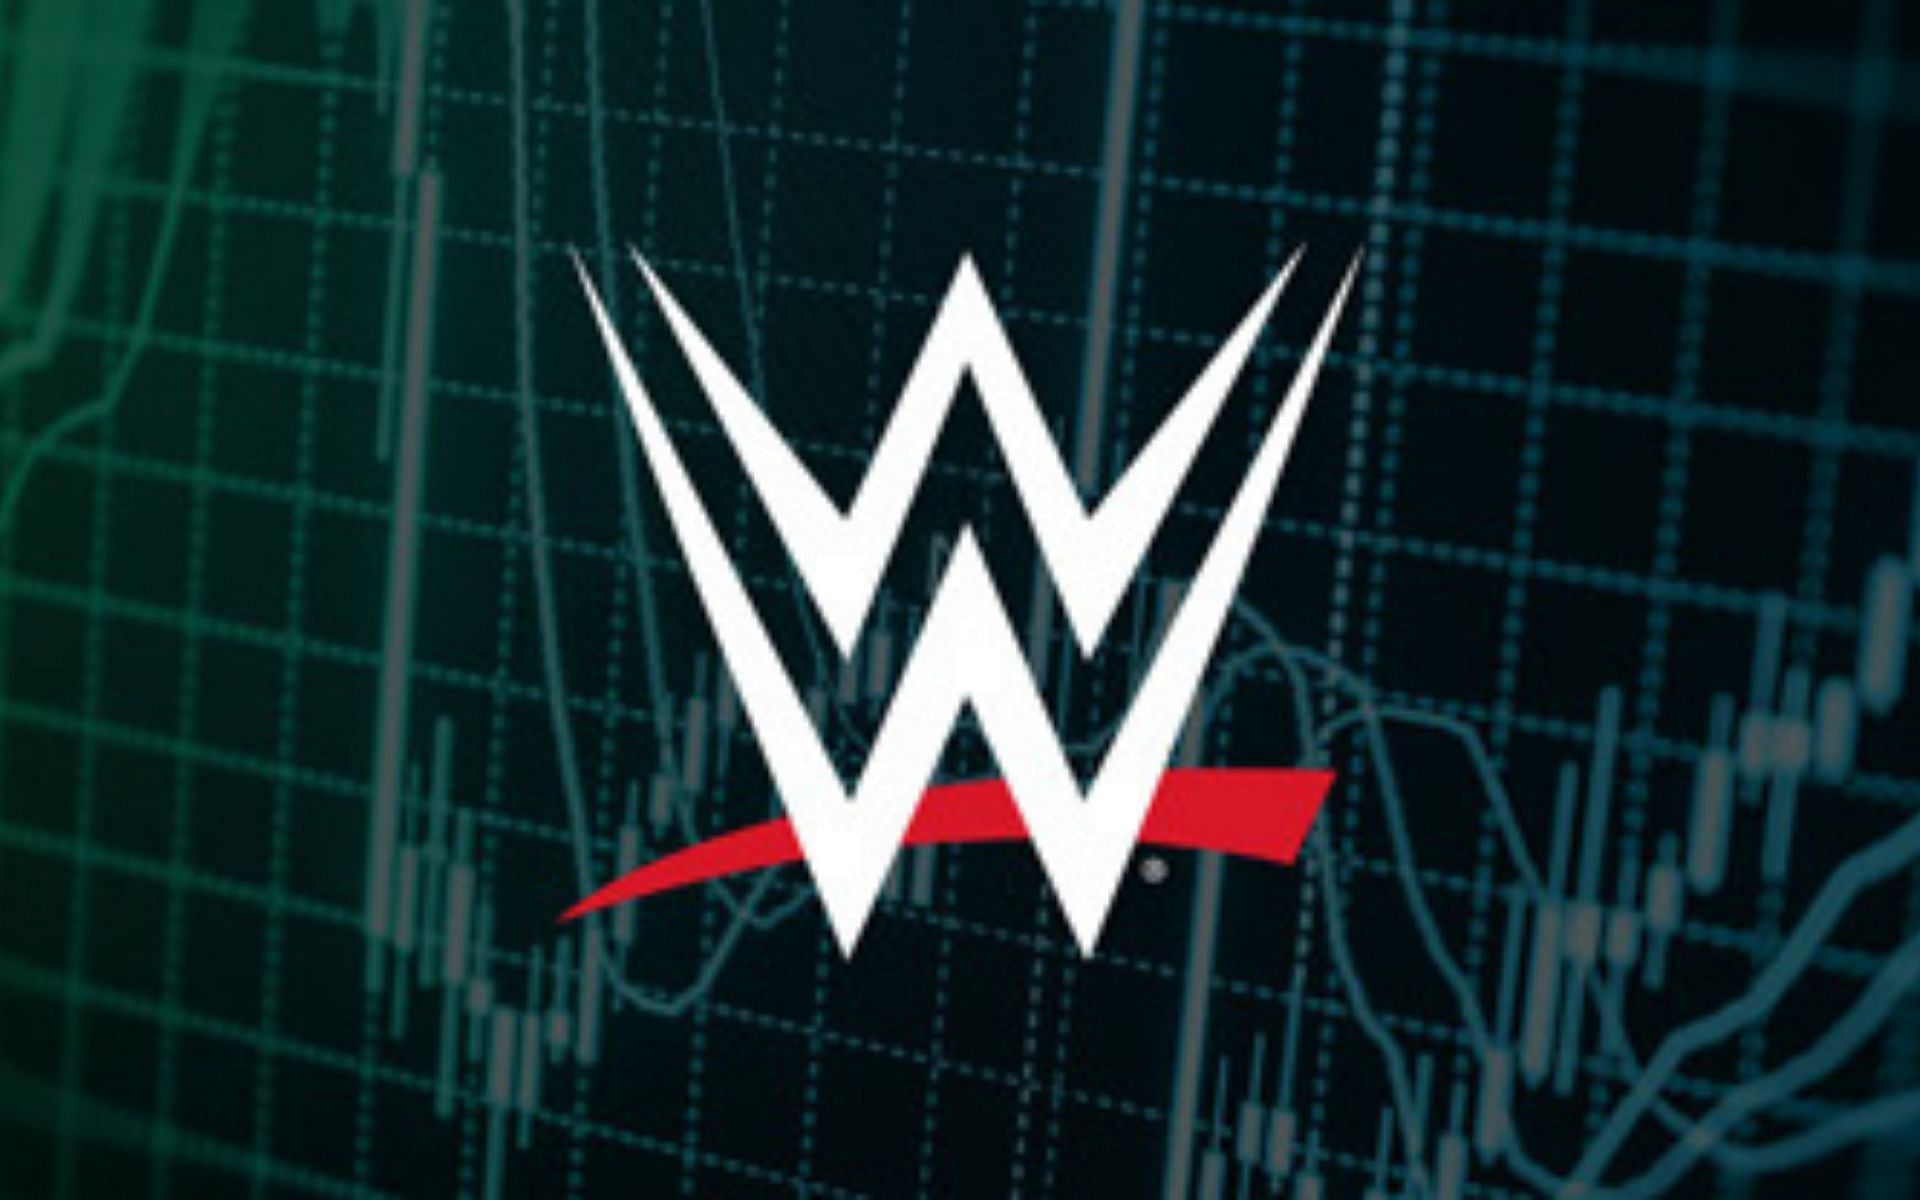 WWE fared well in their stocks and shares last year!